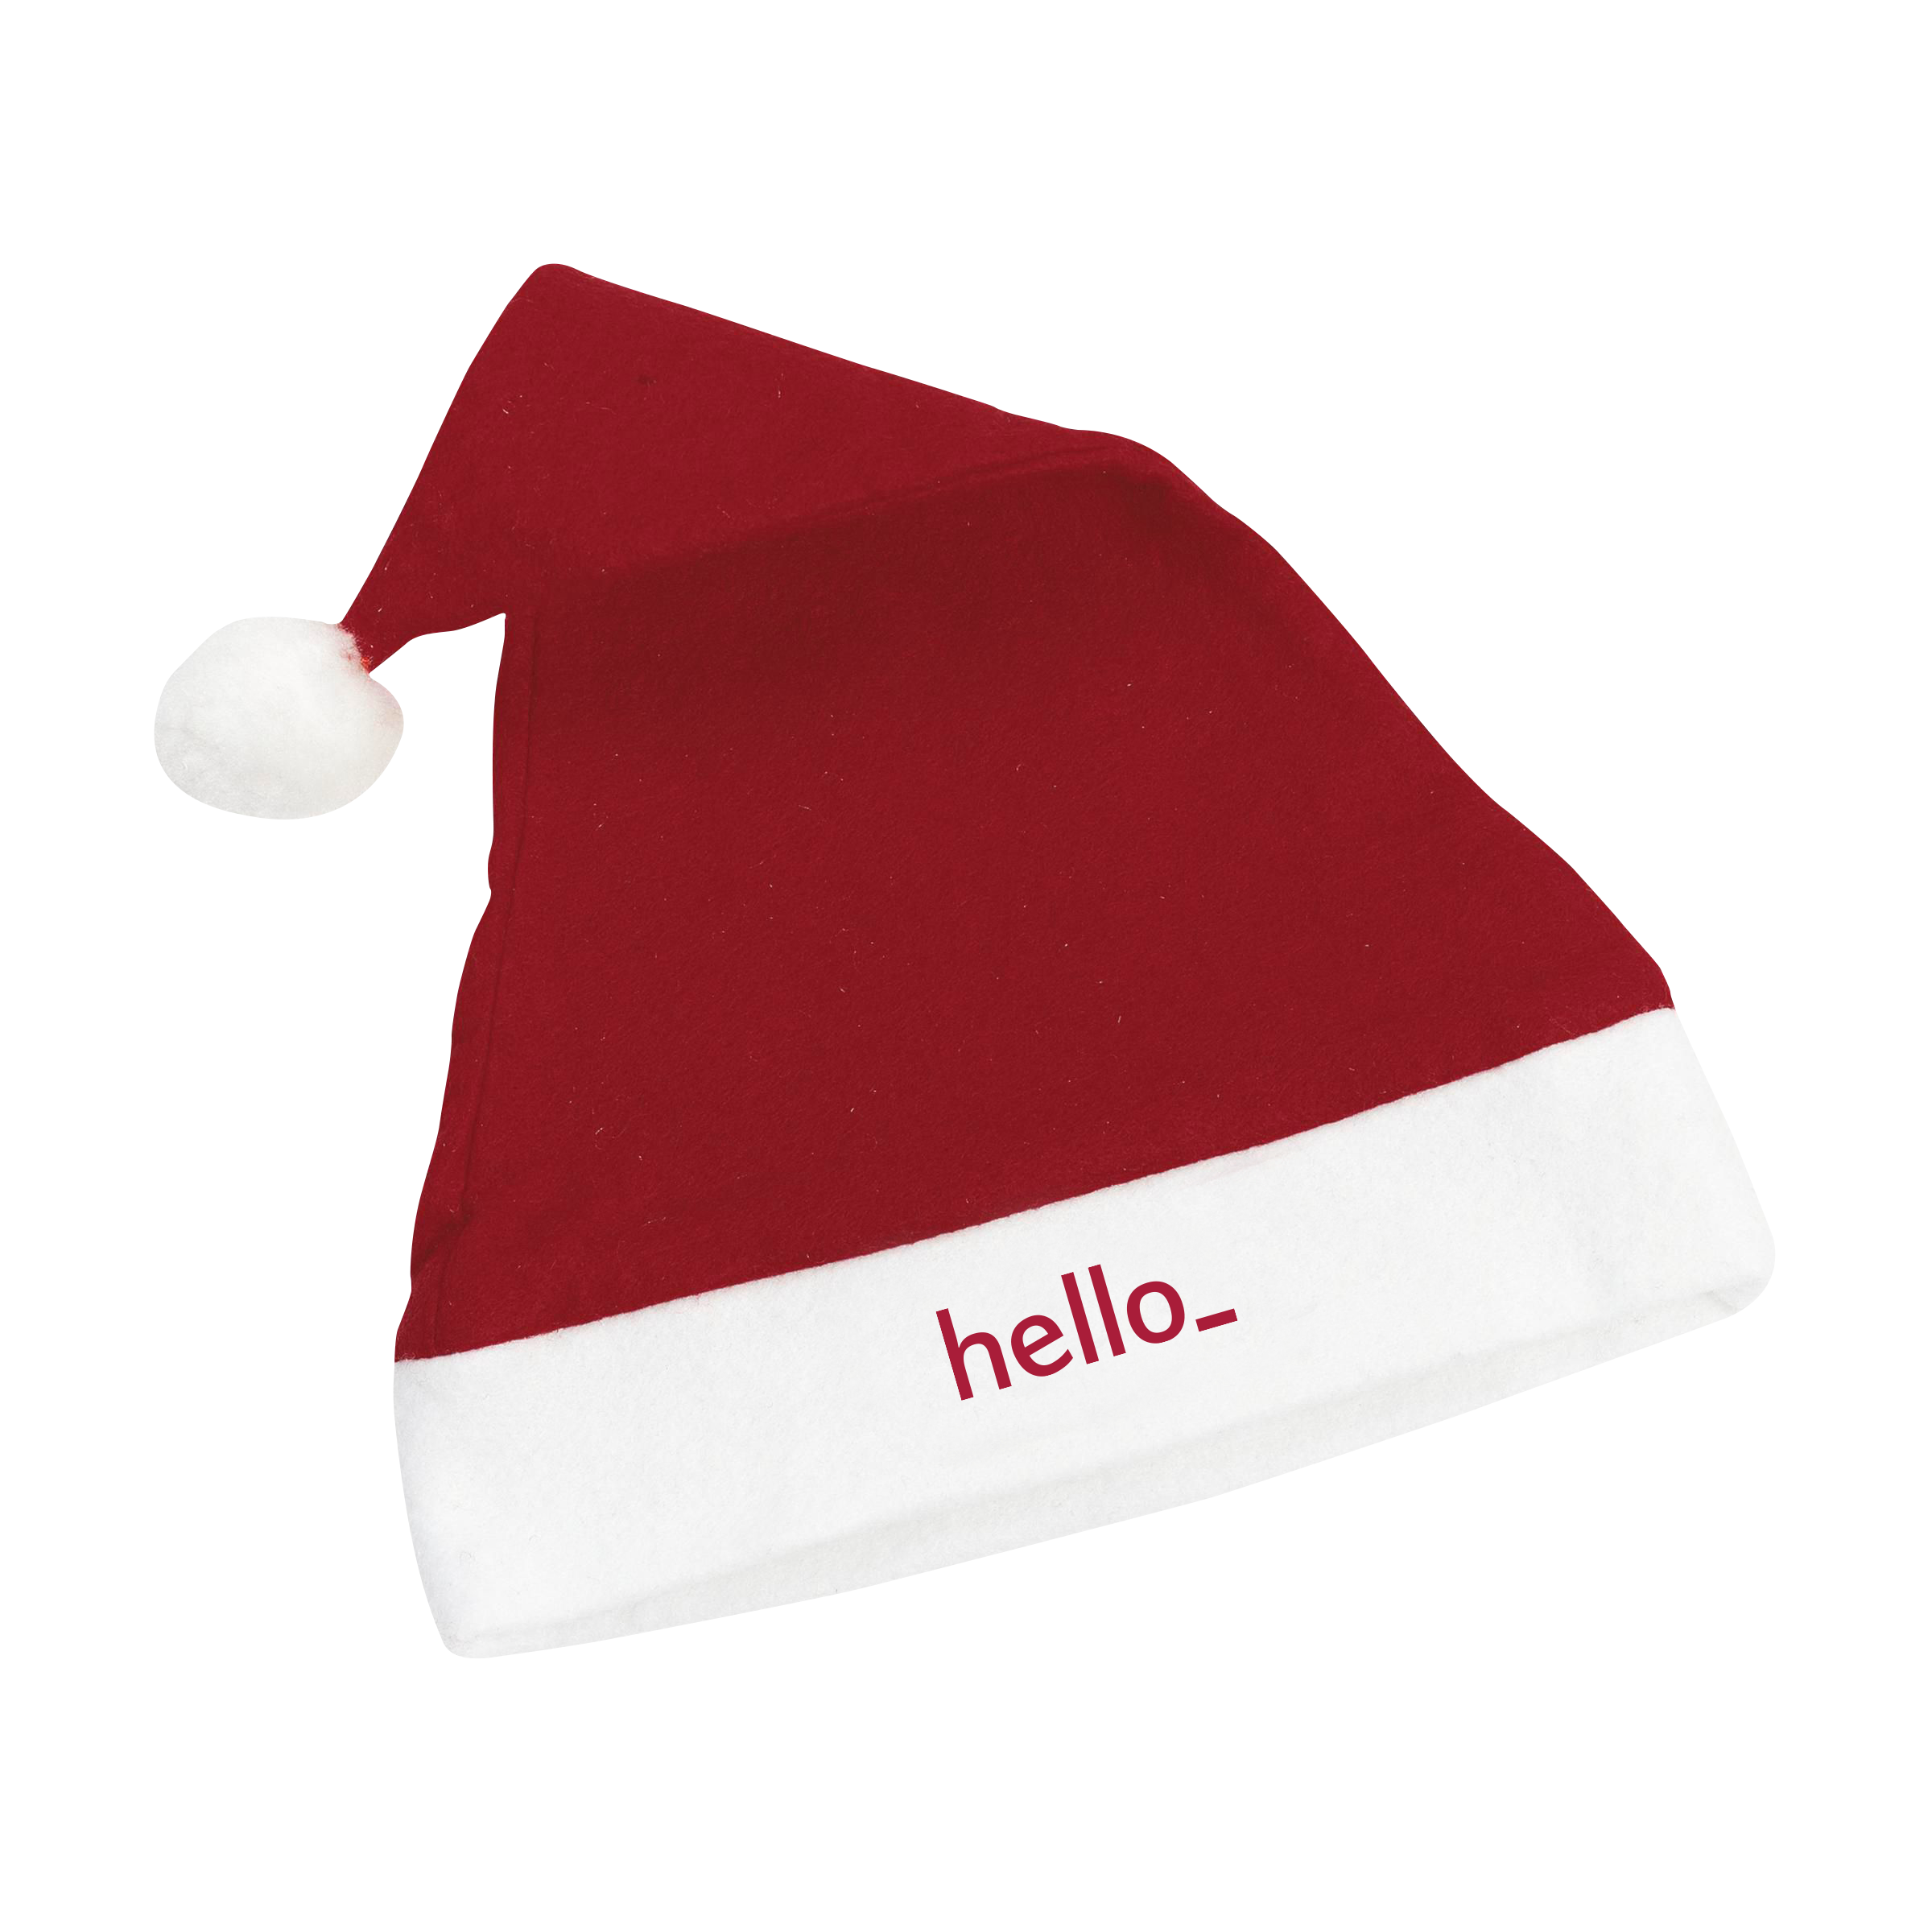 Santa Hat with logo - Business gifts from Pagerr